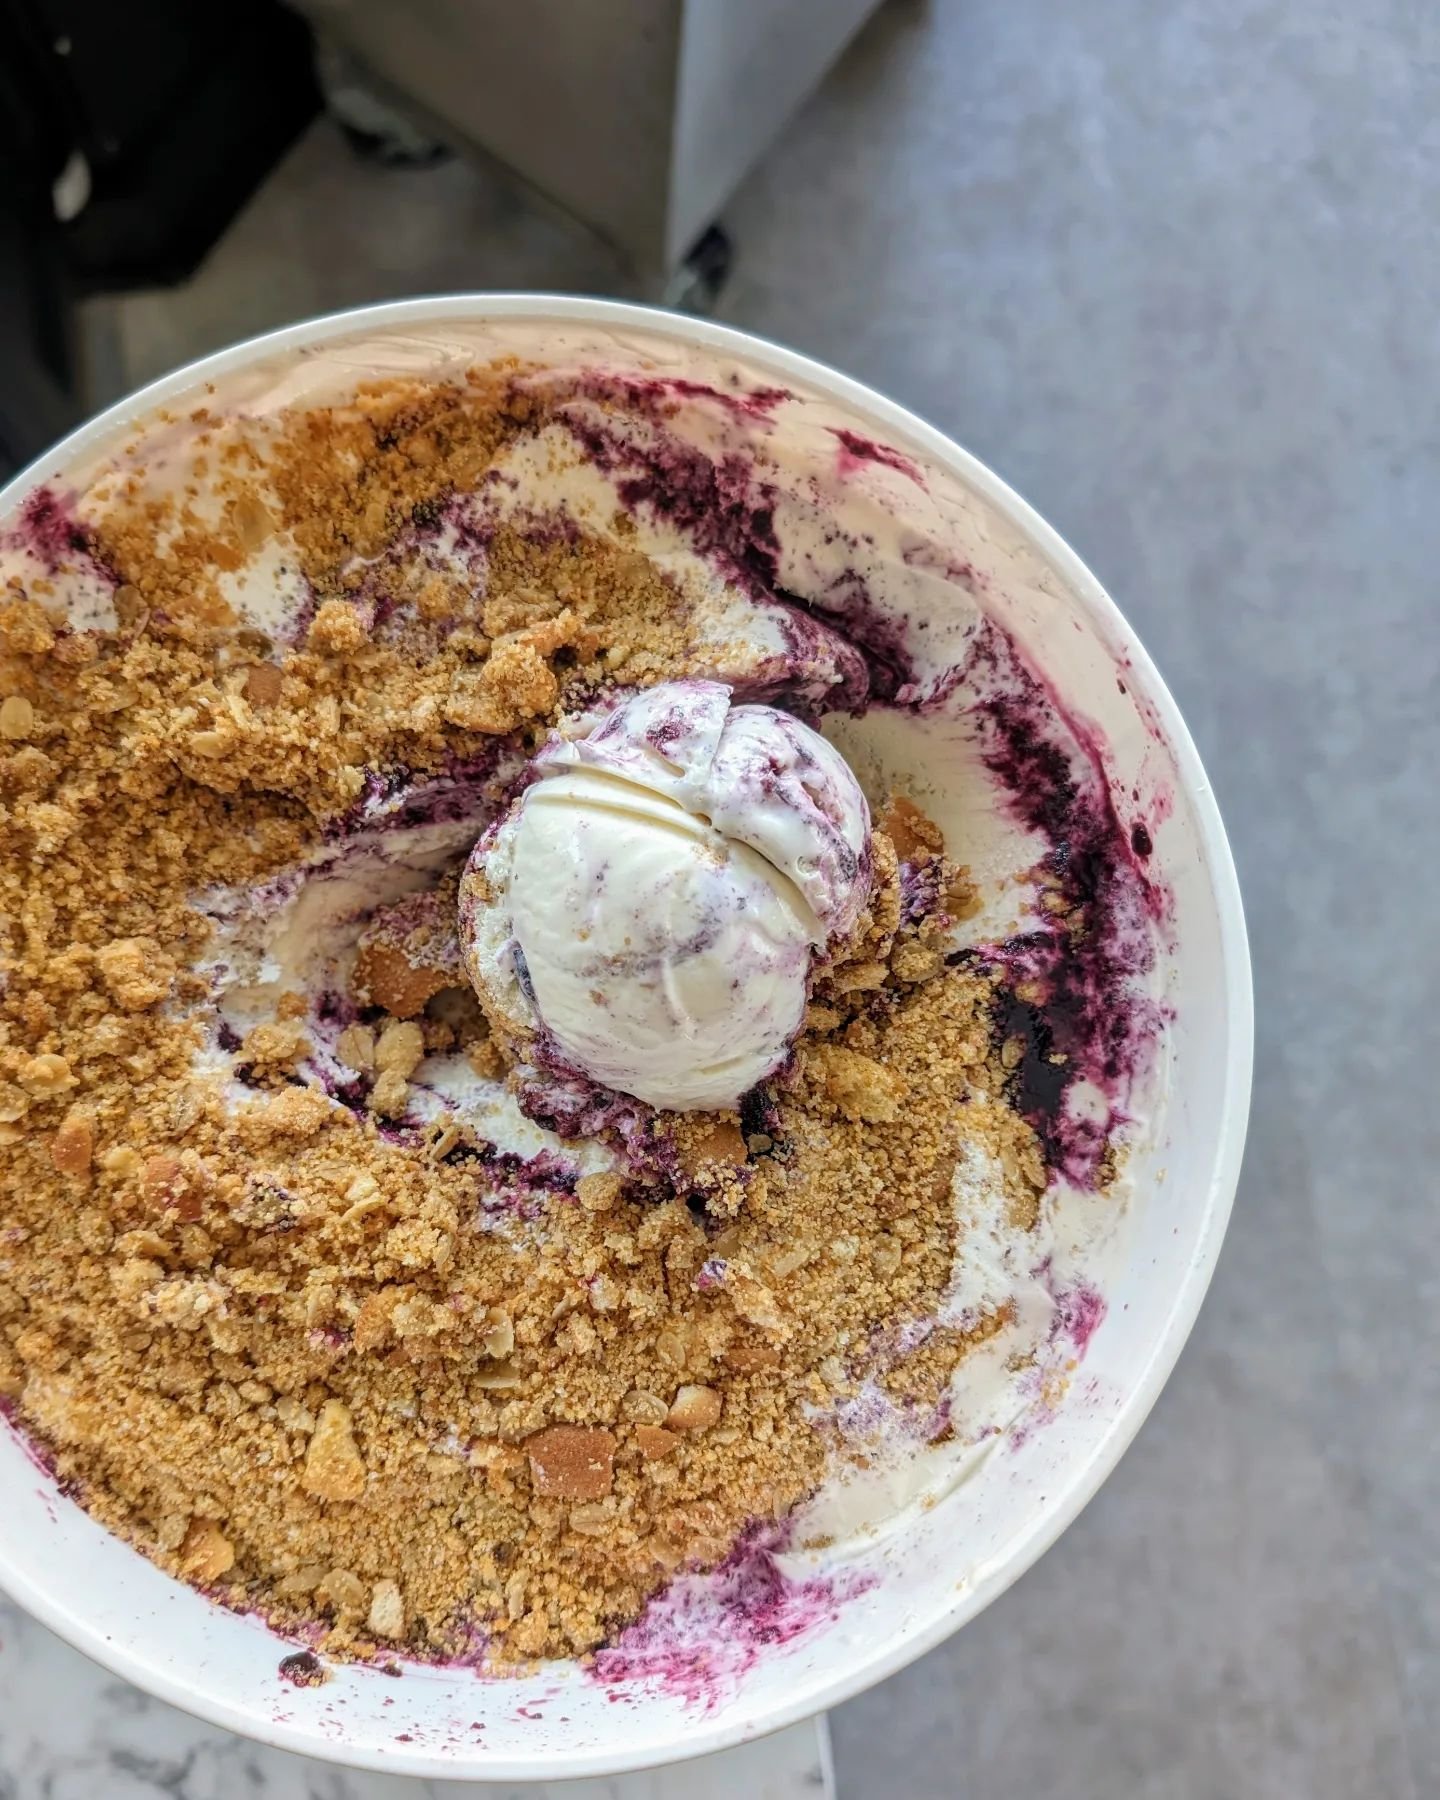 It's a Monday funday if I ever saw one. 76&deg; already, light breeze and the best part... { FLAVORS ALERT } !

BLUEBERRY PIE
&bull; vanilla ice cream + house blueberry jam + our brown butter vanilla wafer crumble &bull;

FLUFFERNUTTER
&bull; torched